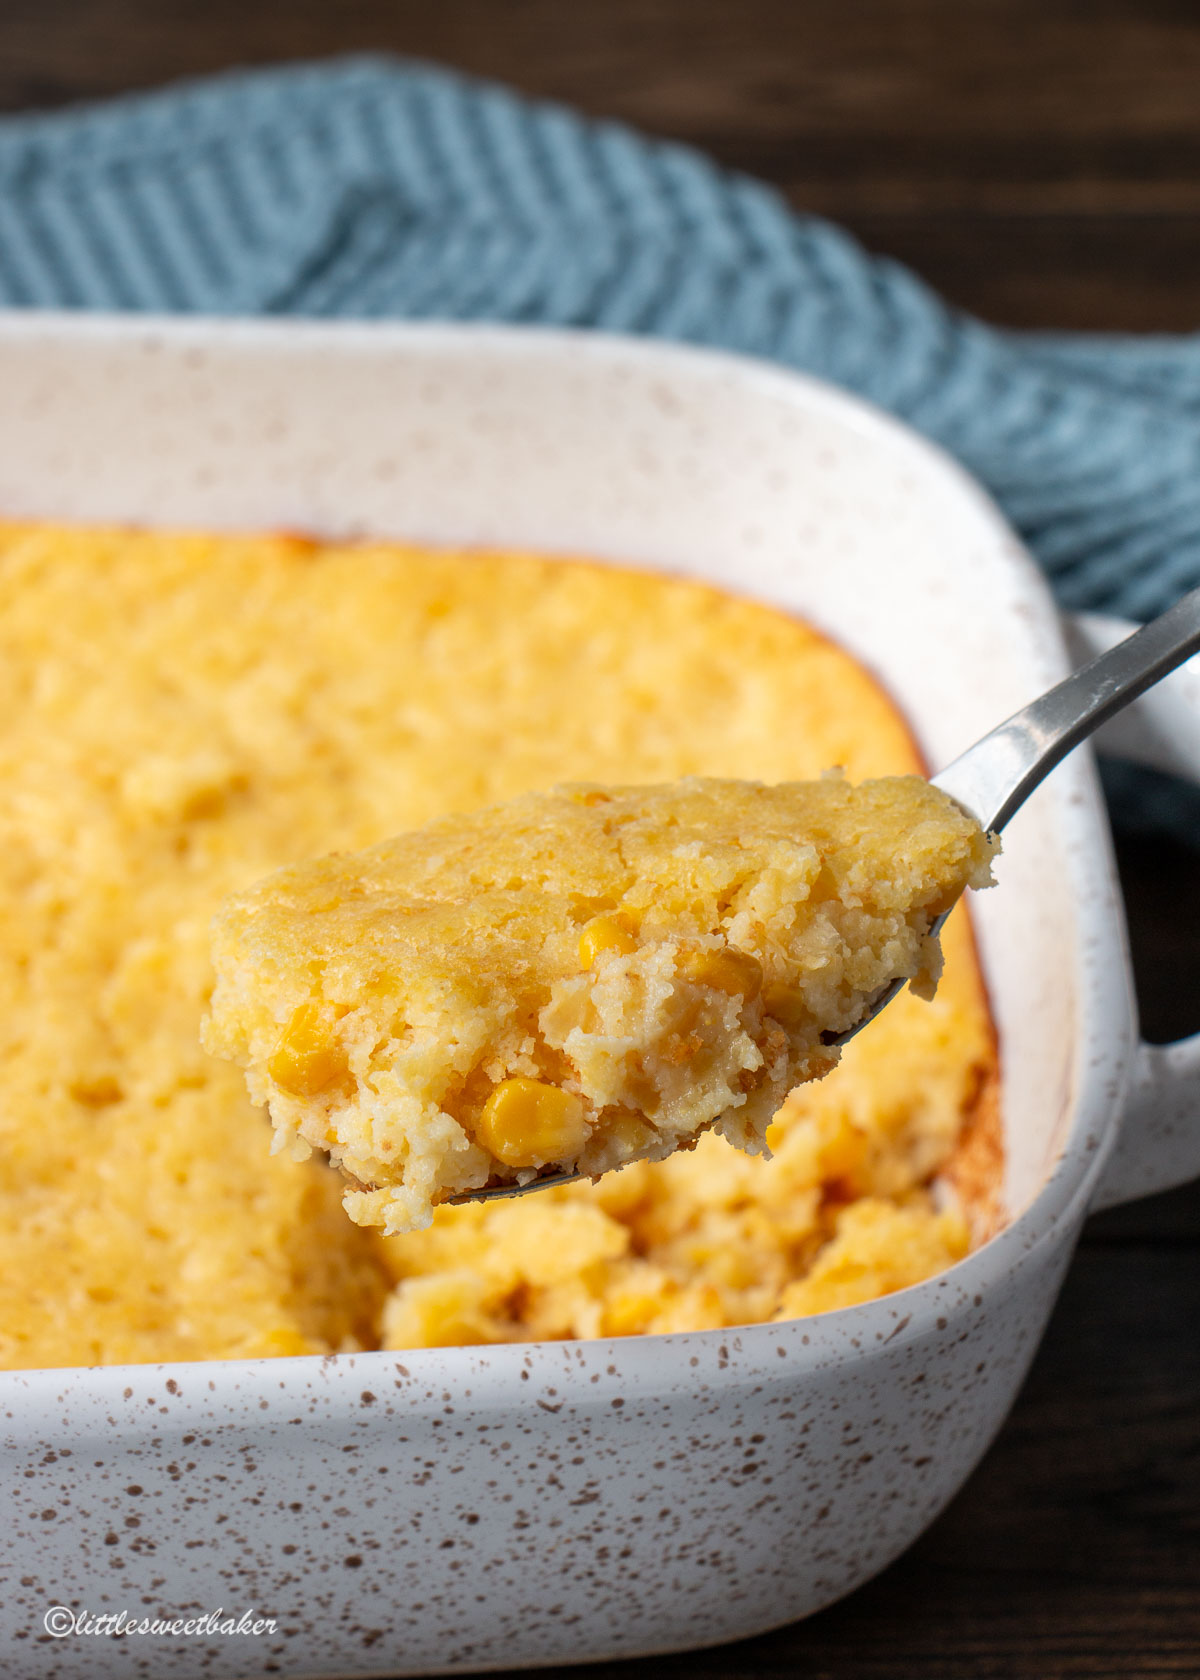 A spoonful of corn casserole being lifted from the casserole dish.